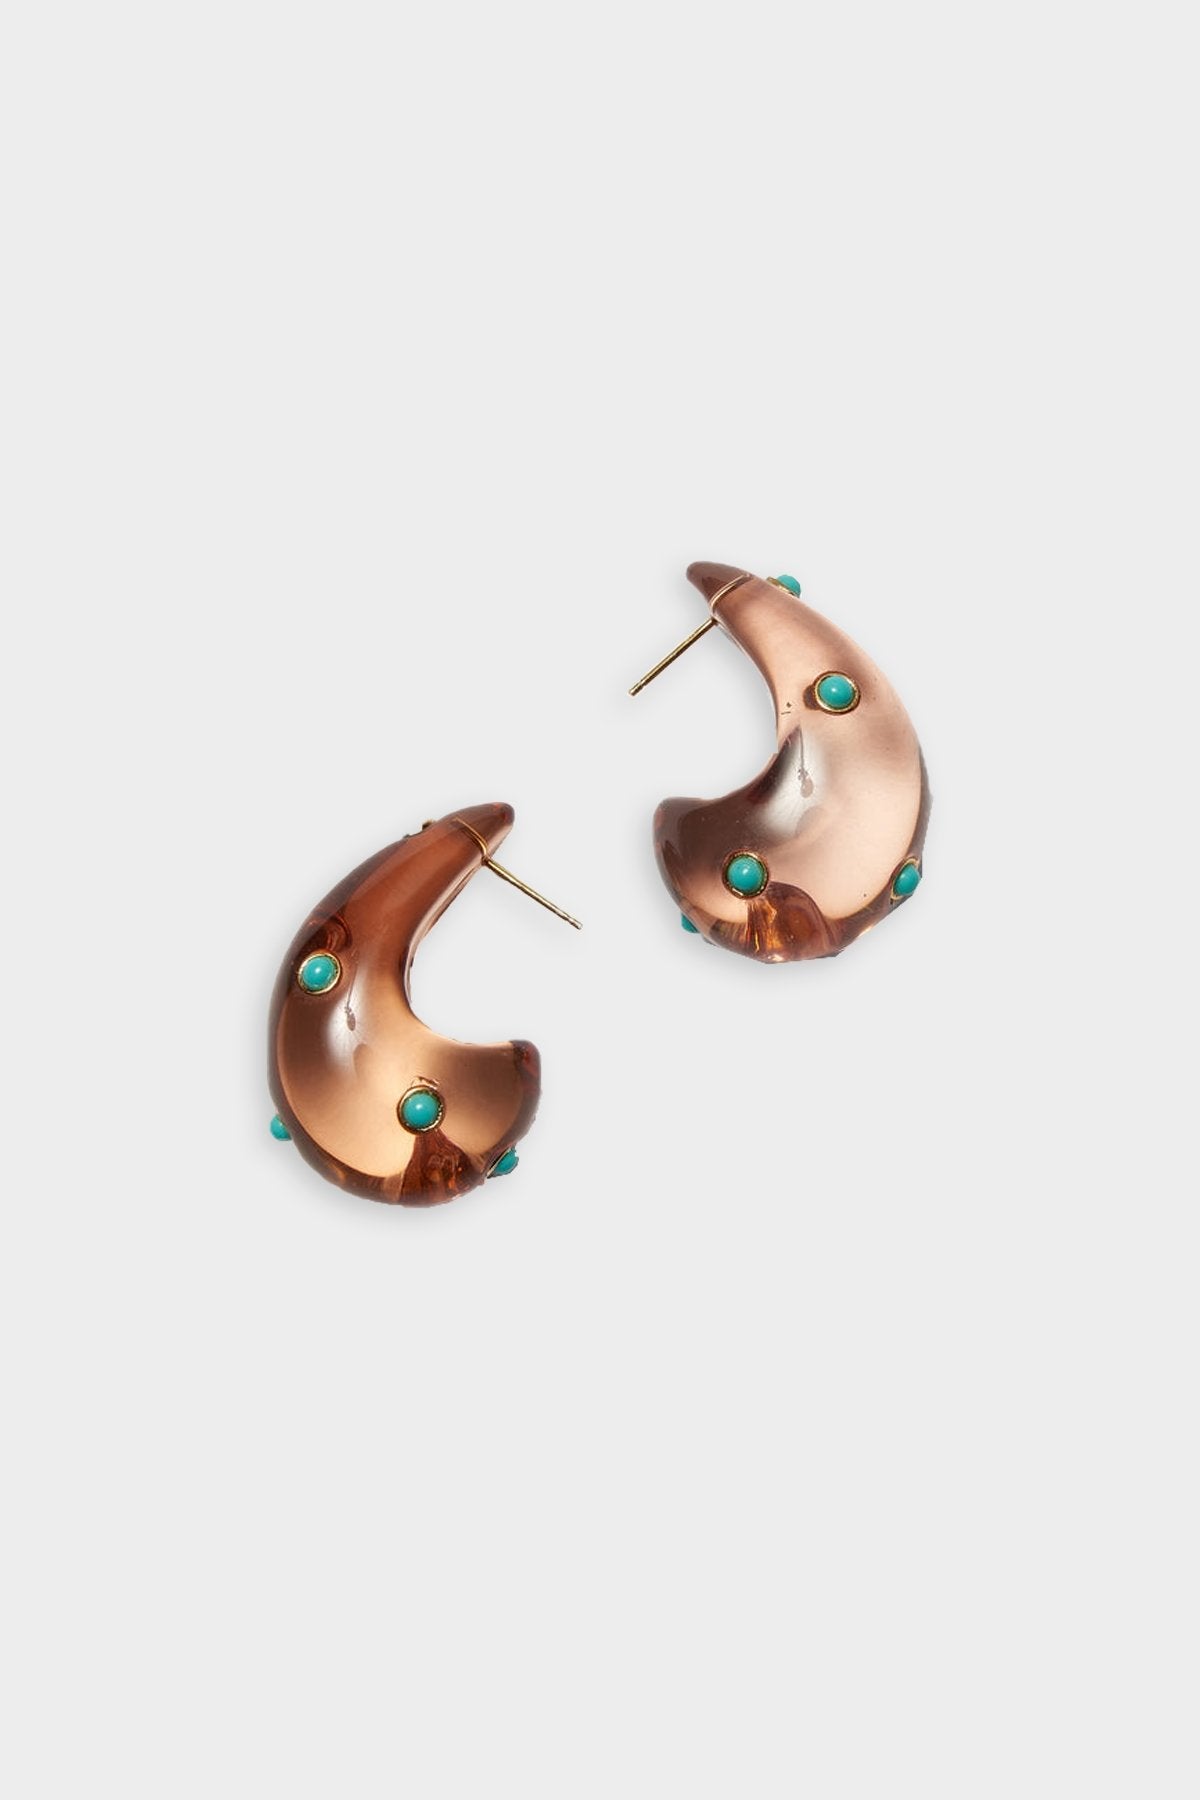 Arp Earrings in Dotted Caramel - shop-olivia.com